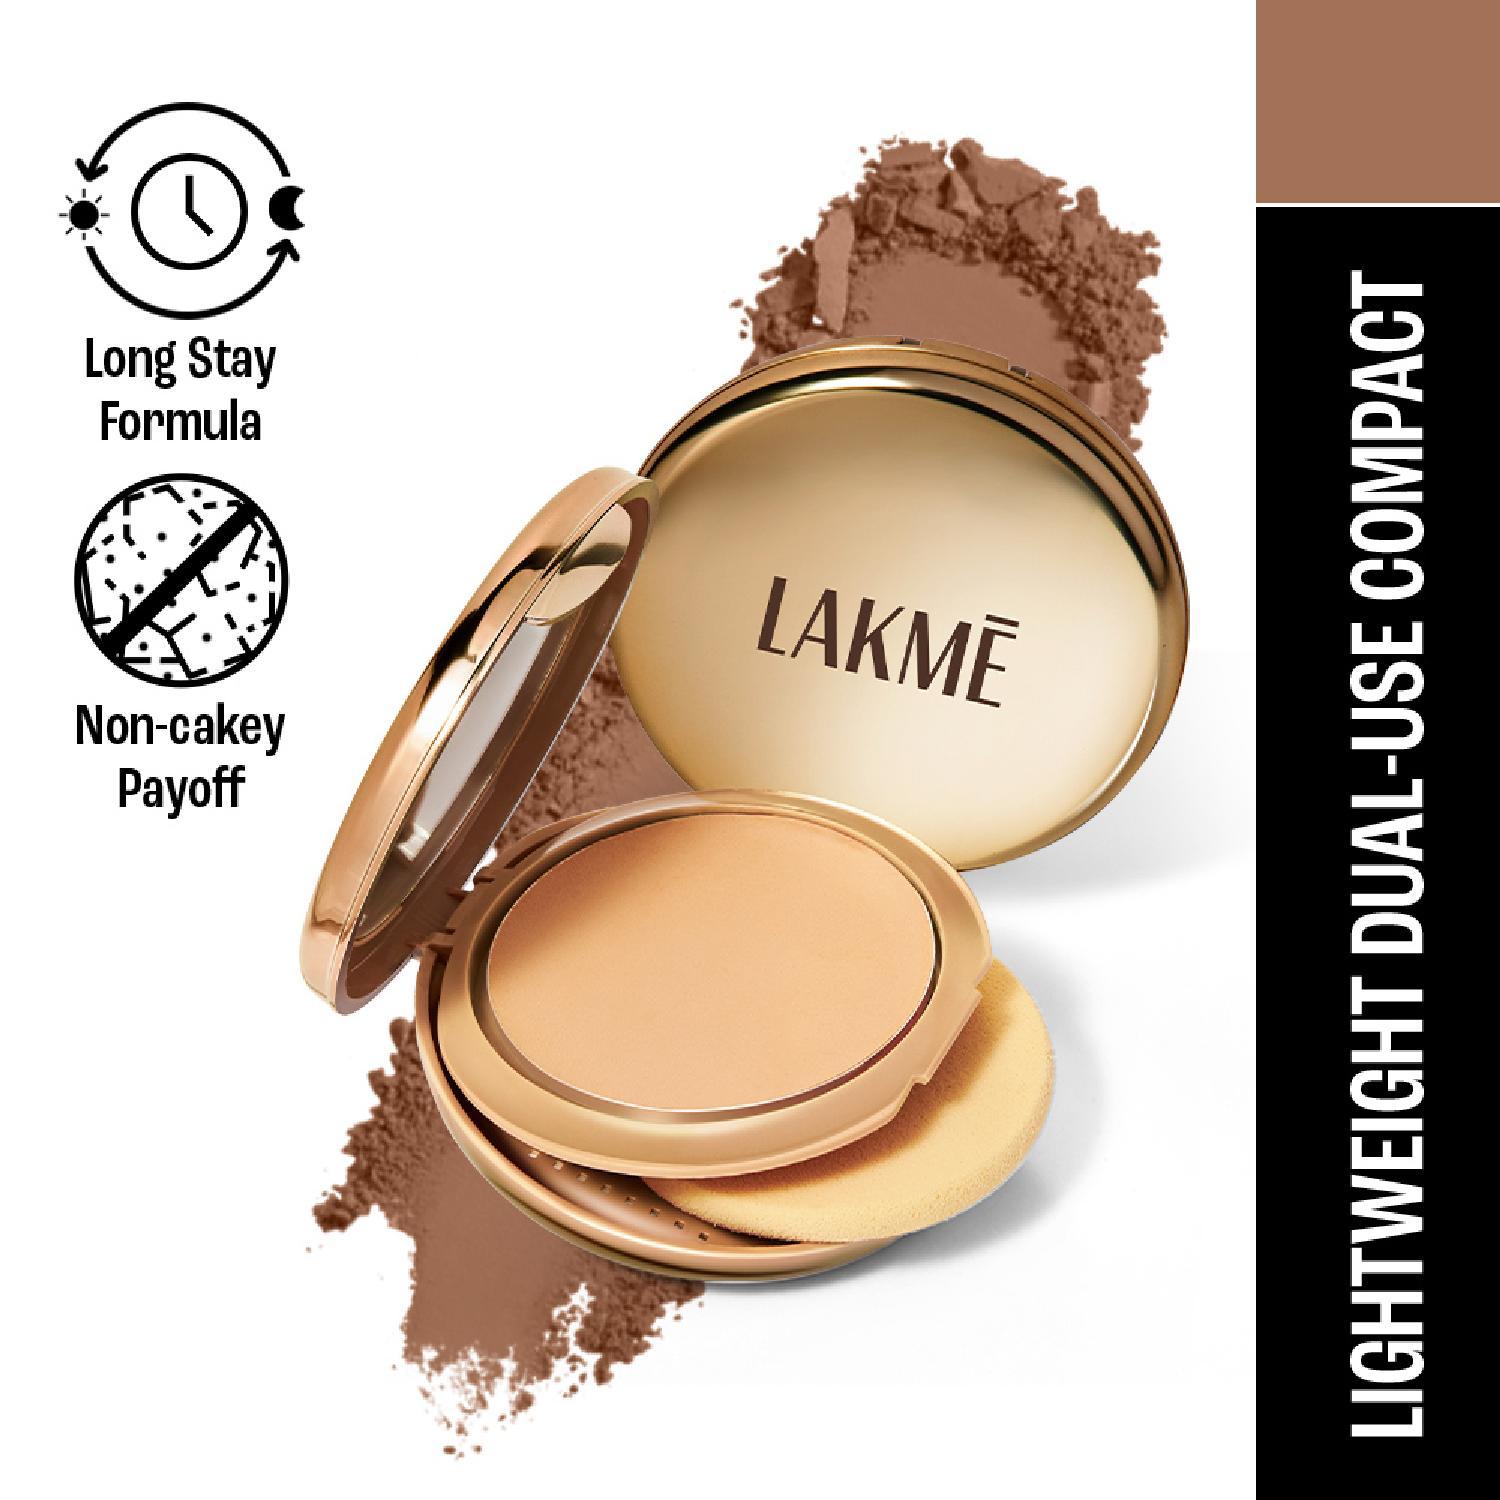 Lakme | Lakme 9 to 5 Unreal Dual Cover Pressed Powder, 2 In 1 Compact + Foundation, 39 Cocoa (9g)